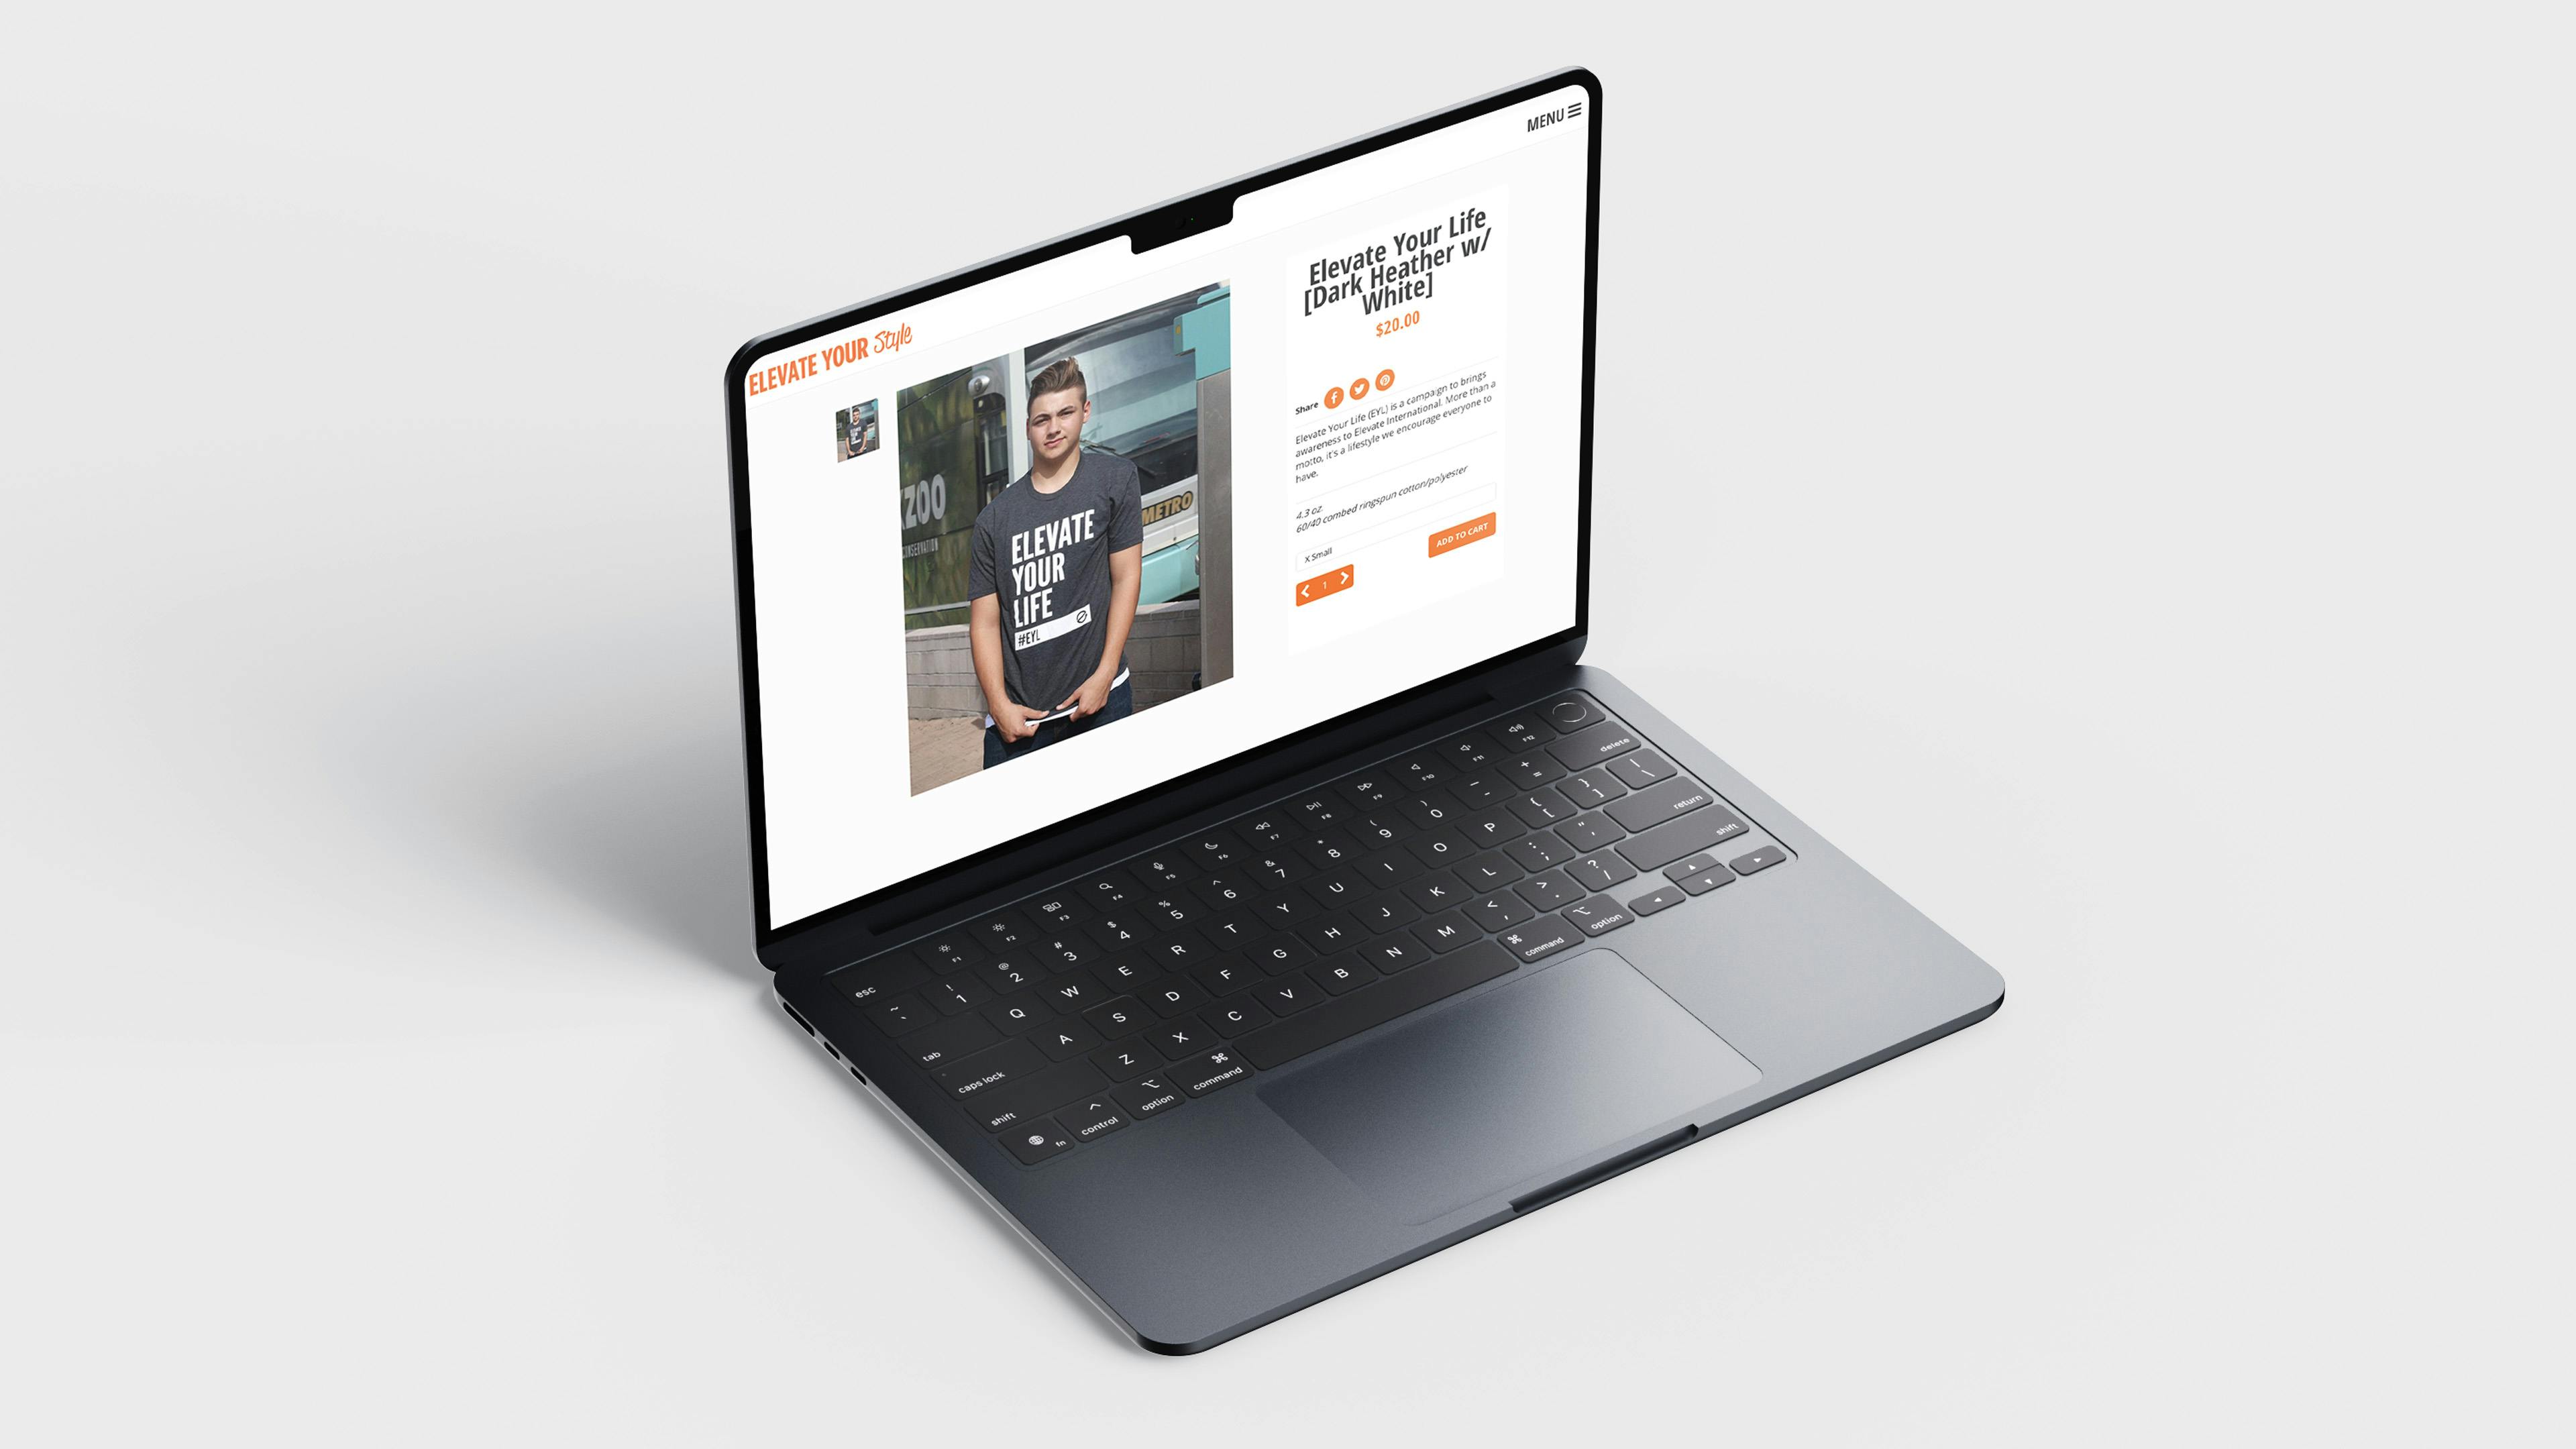 A mockup of a Macbook with the Elevate Your Style product page